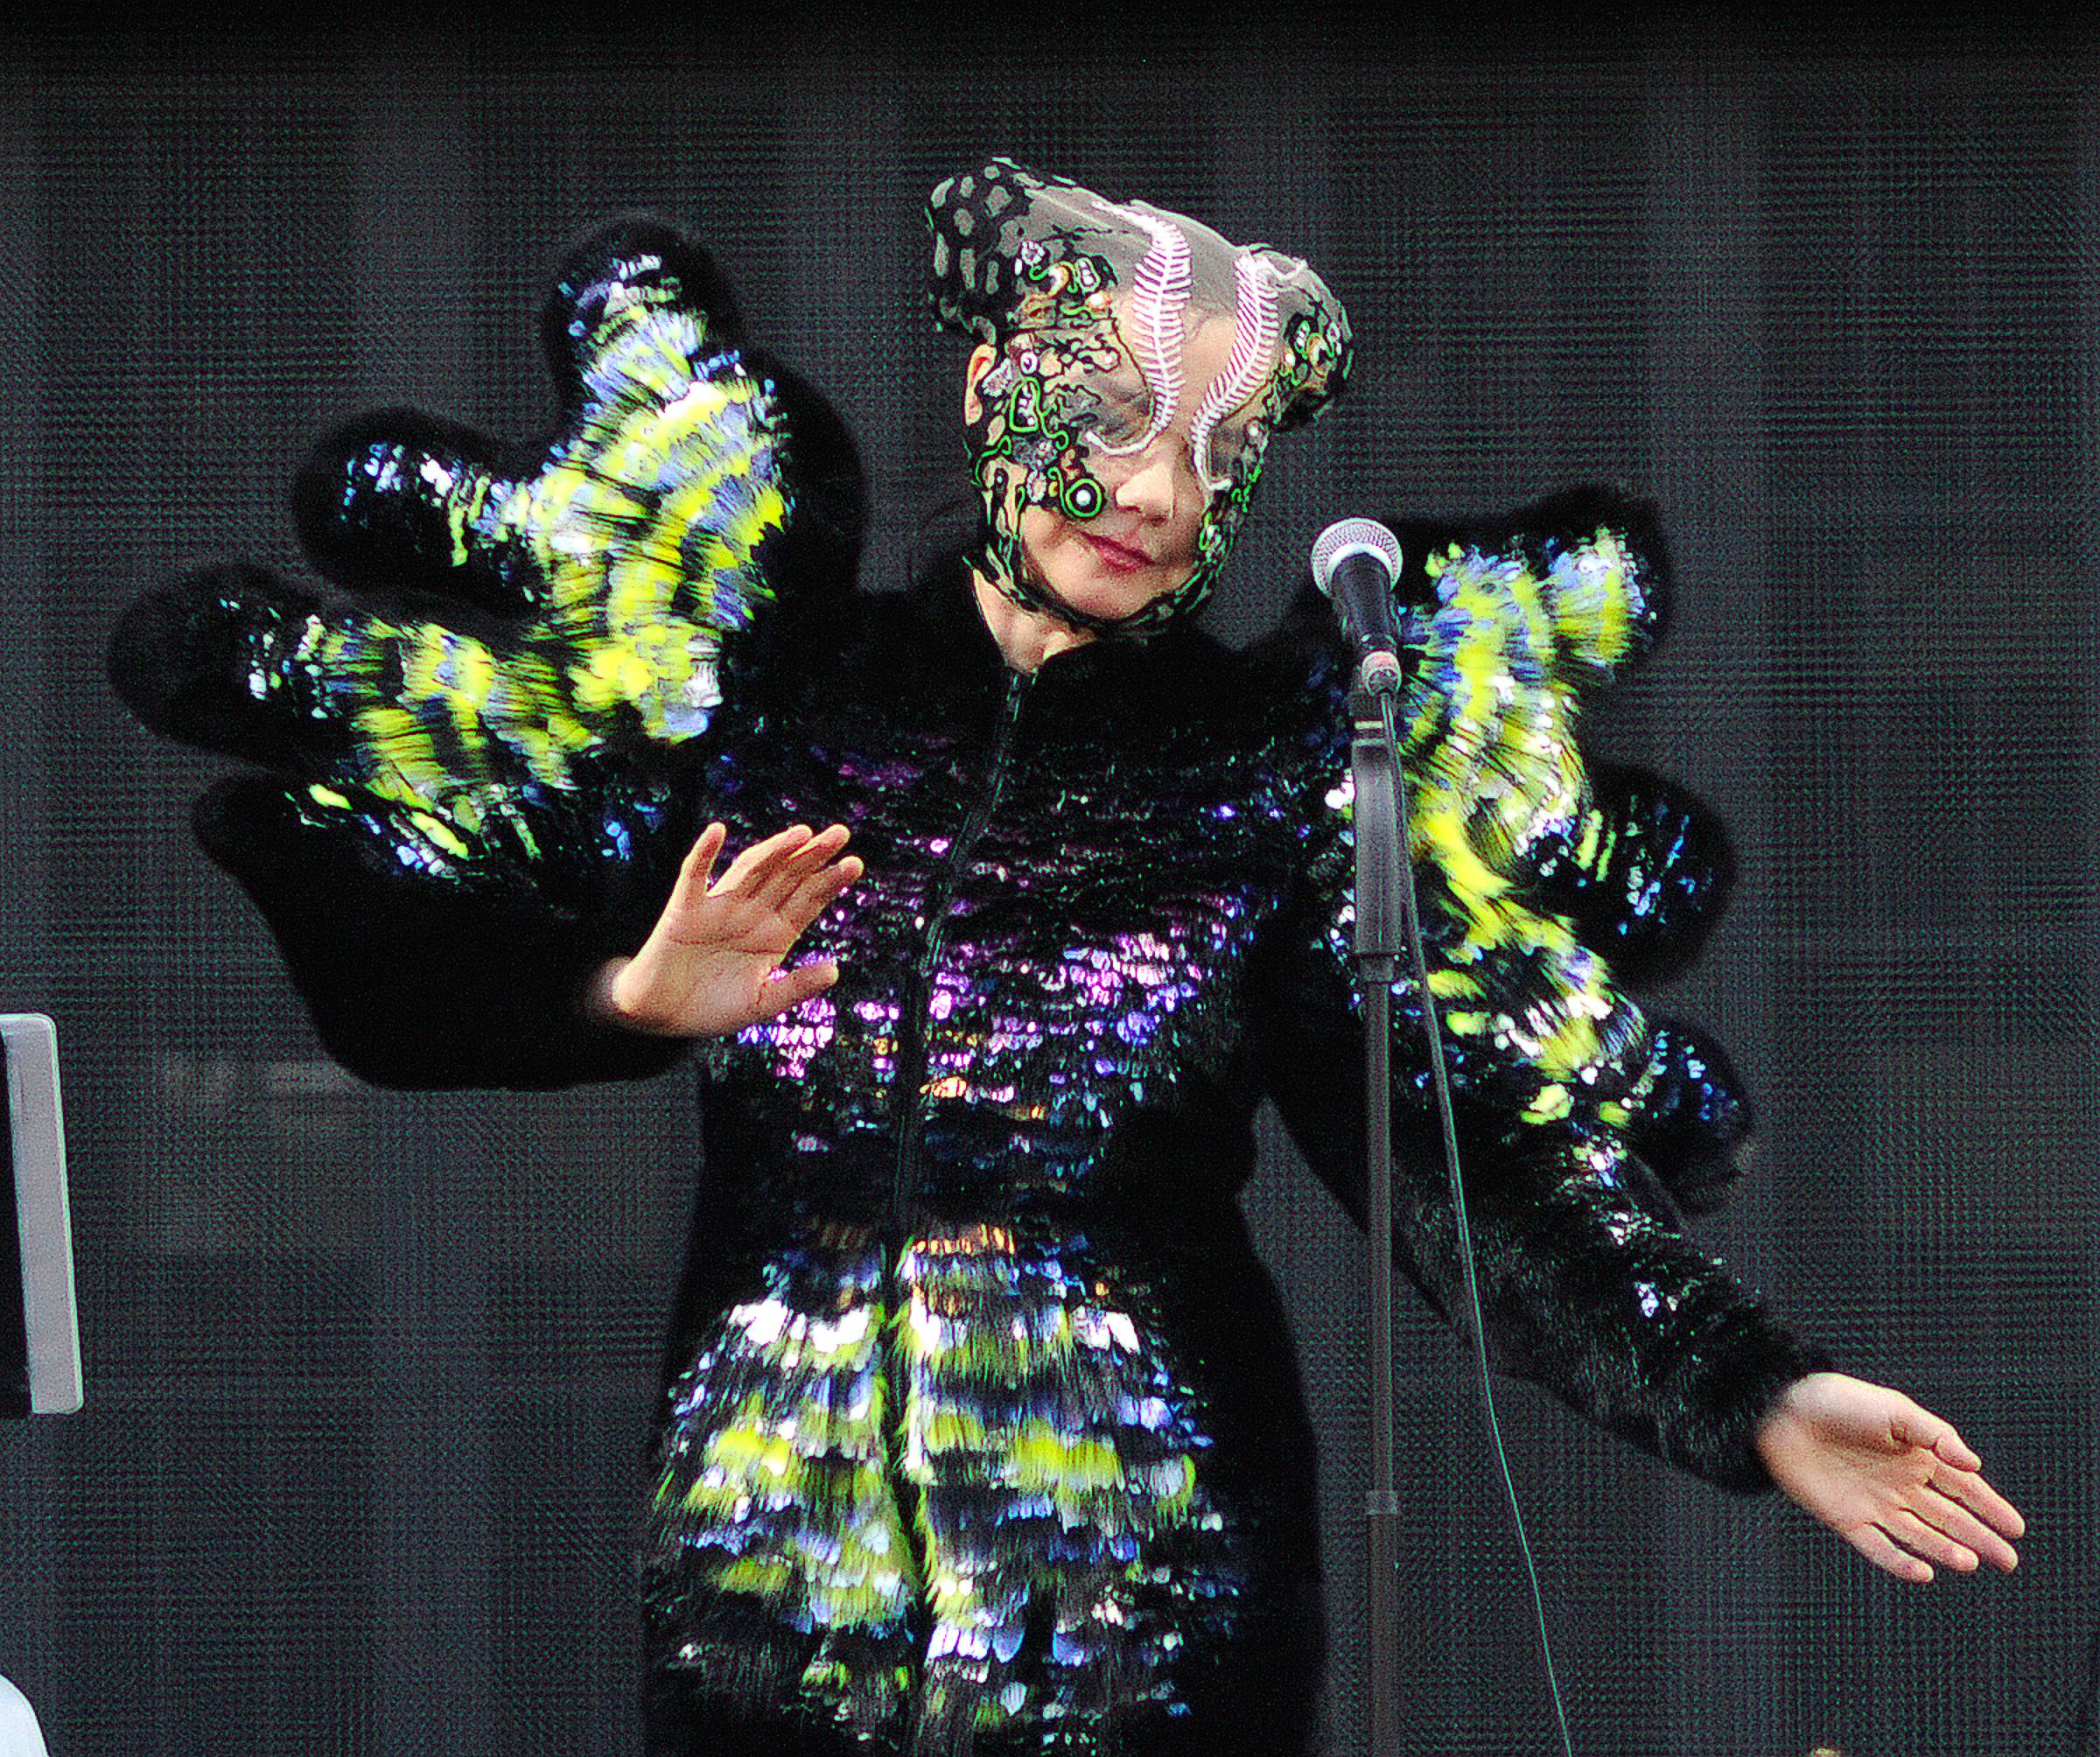 Björk performs during the 2015 Governors Ball Music Festival in New York City on June 6, 2015.